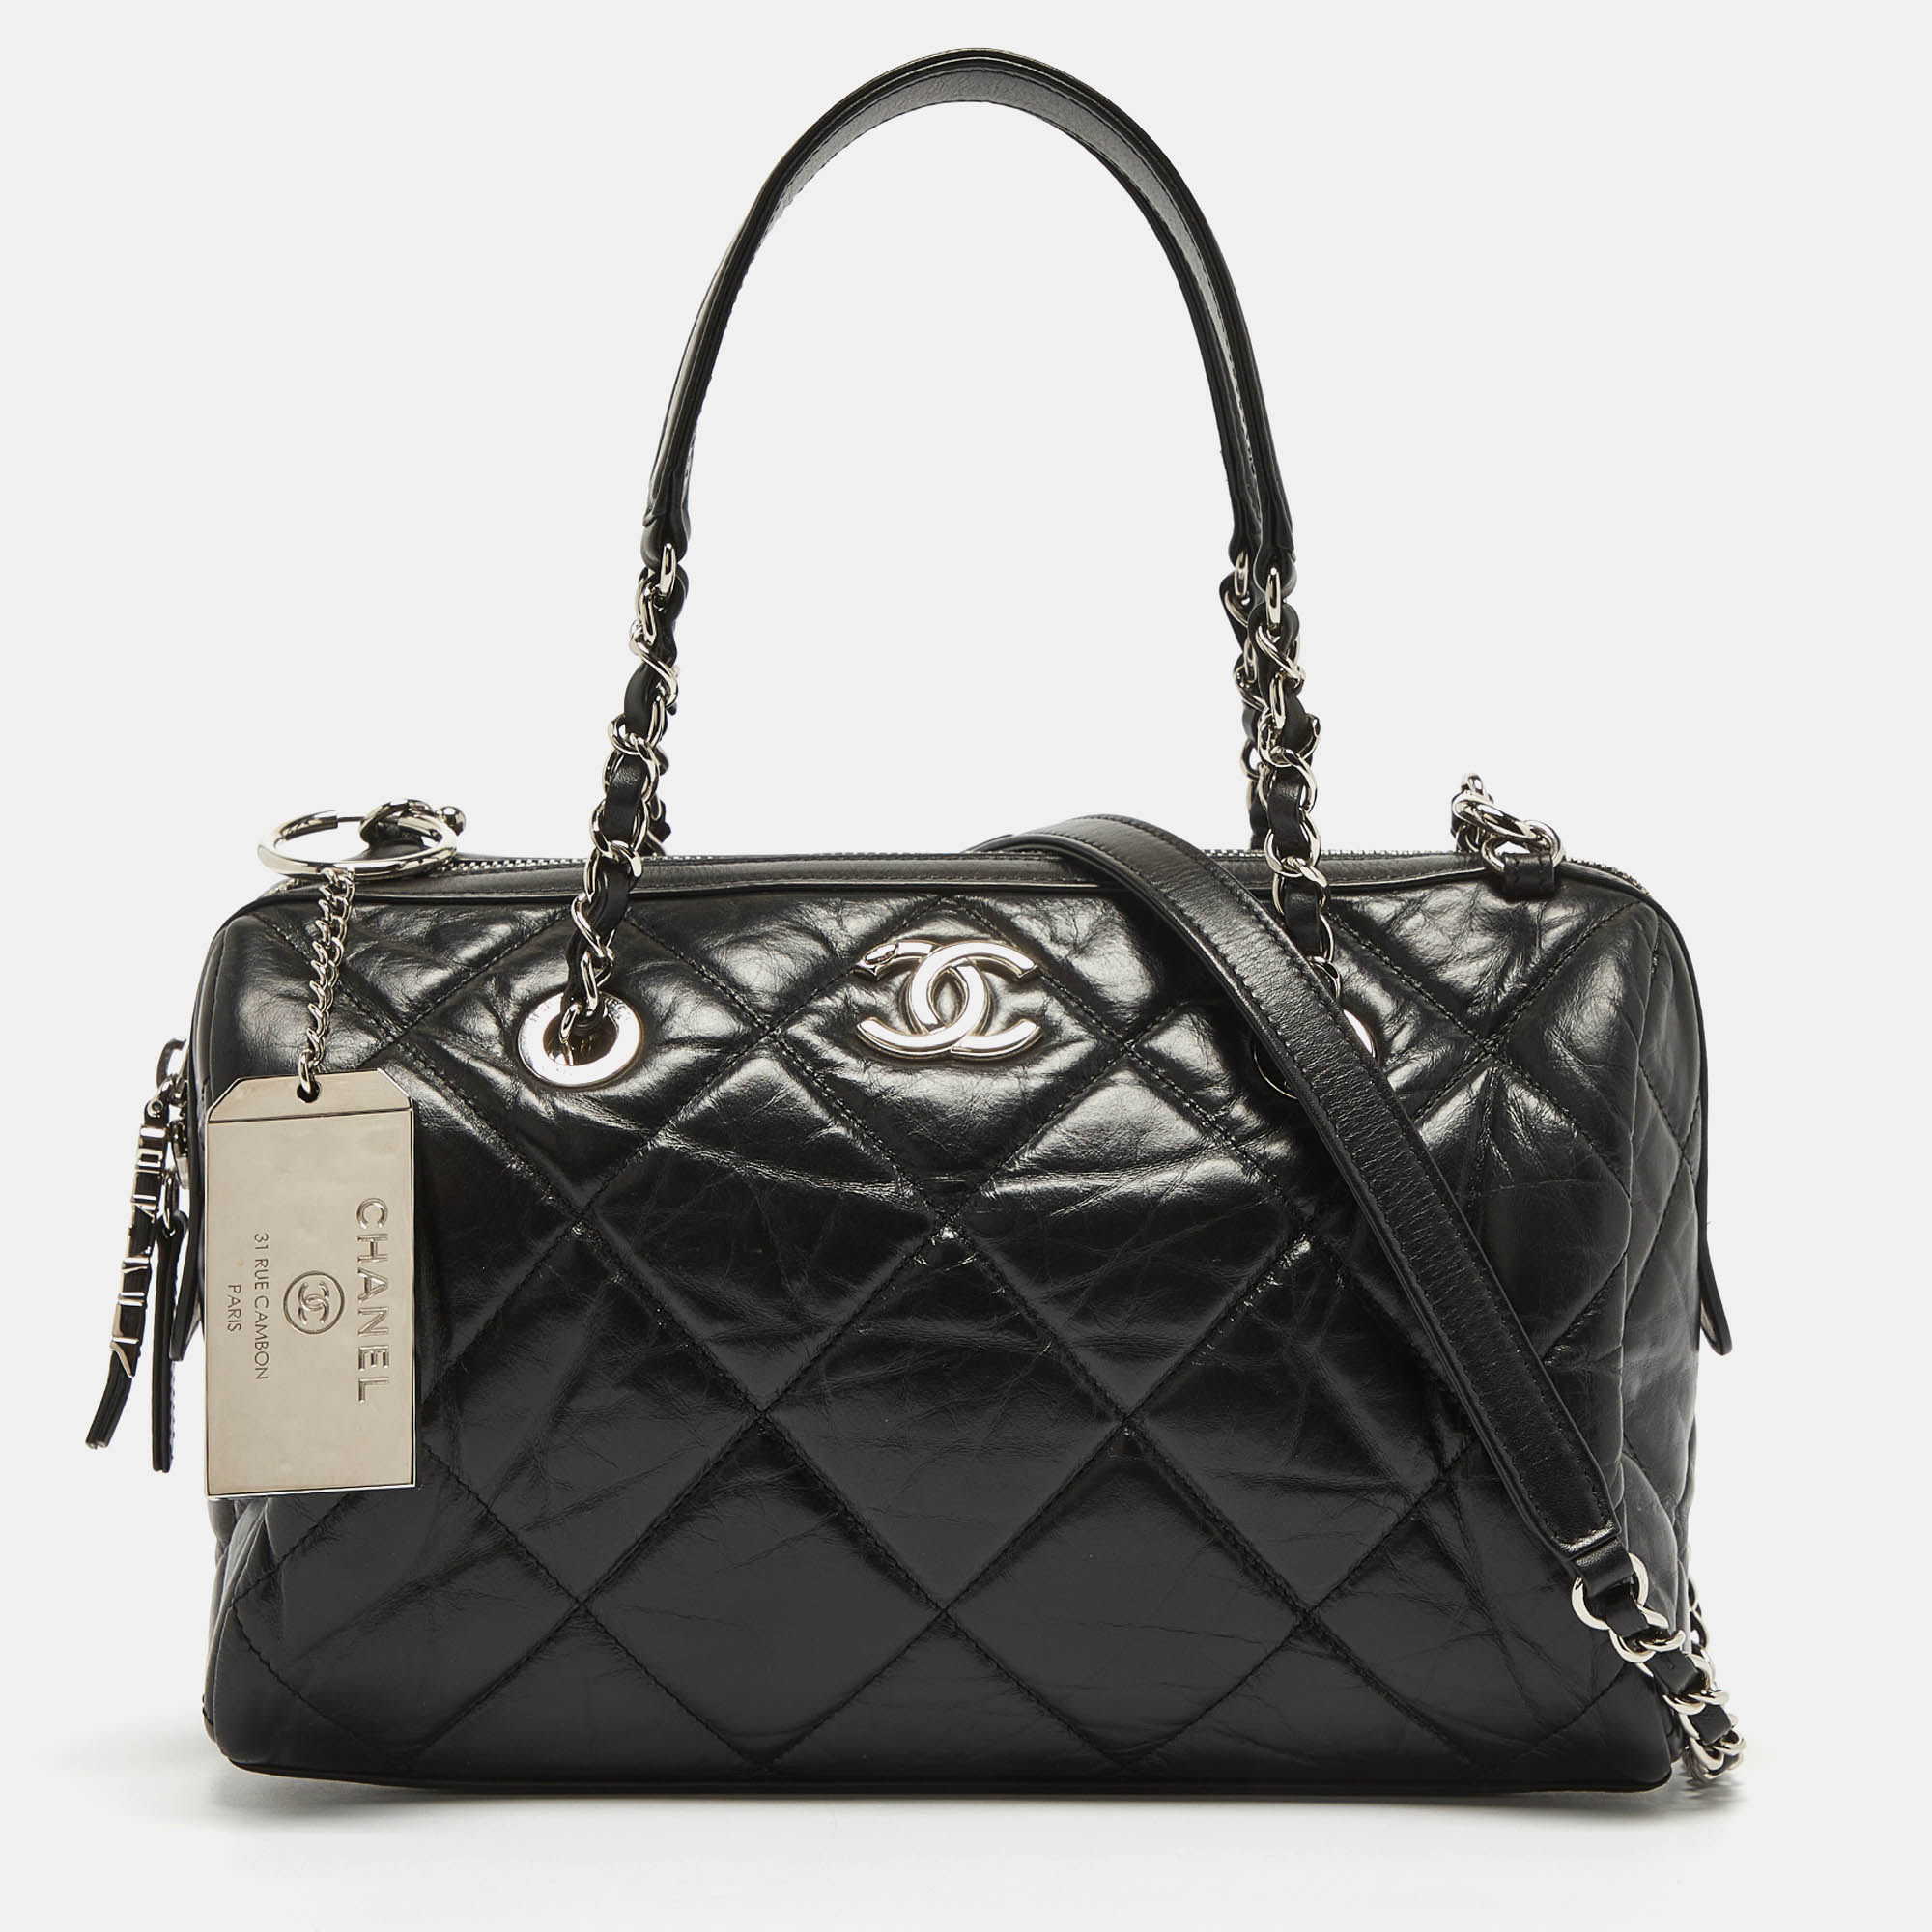 

Chanel Black Quilted Leather CC Chain Satchel